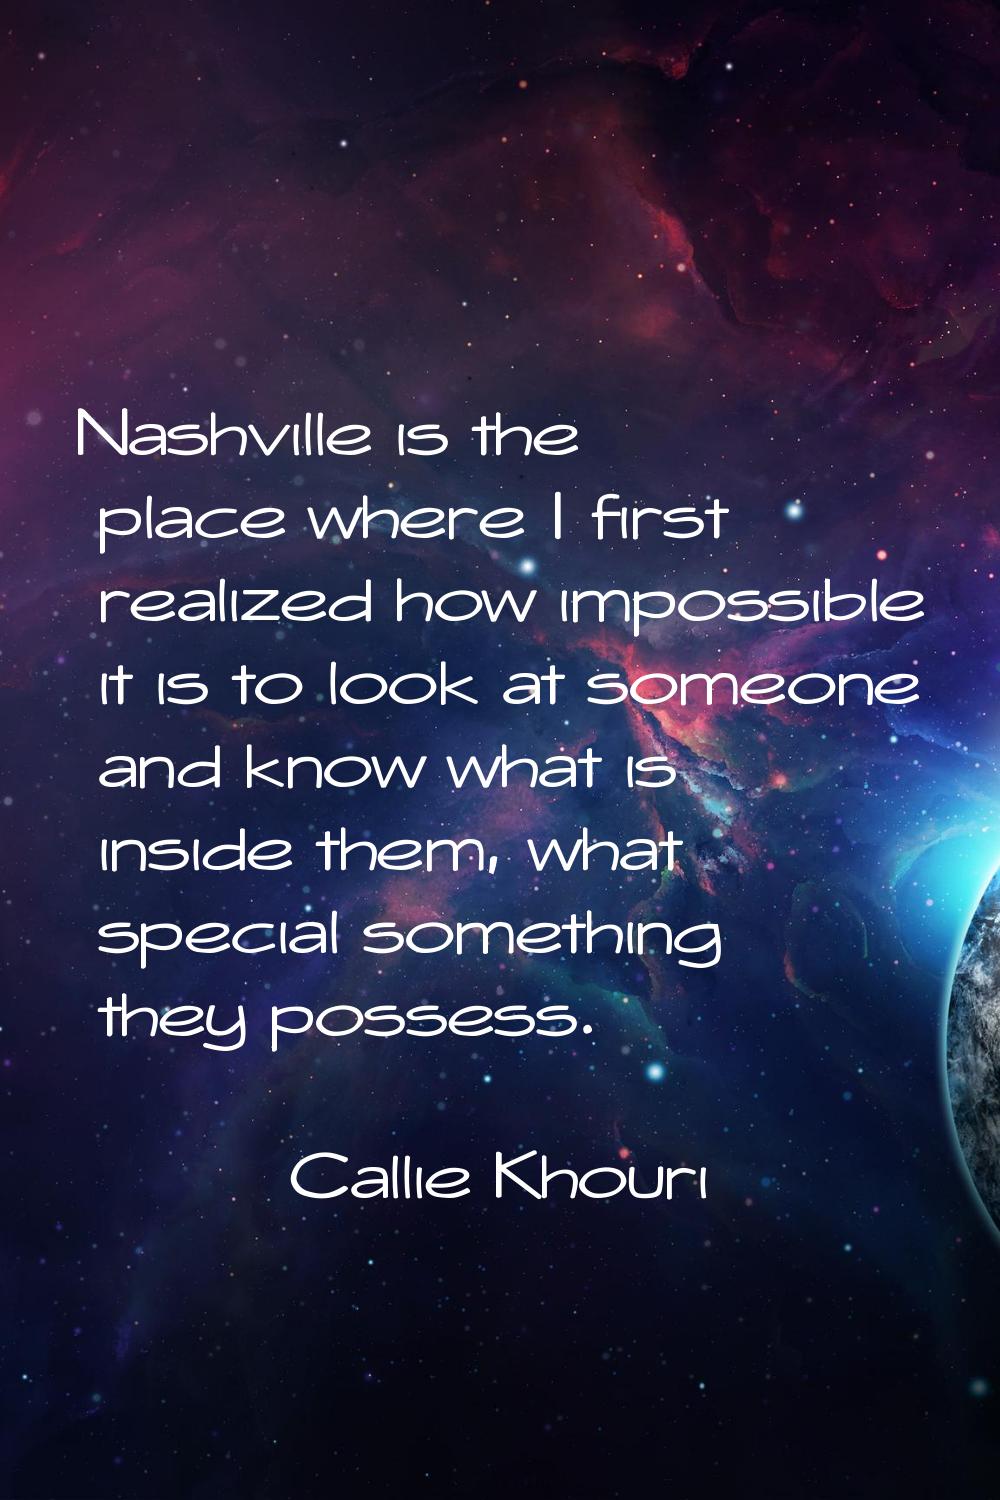 Nashville is the place where I first realized how impossible it is to look at someone and know what